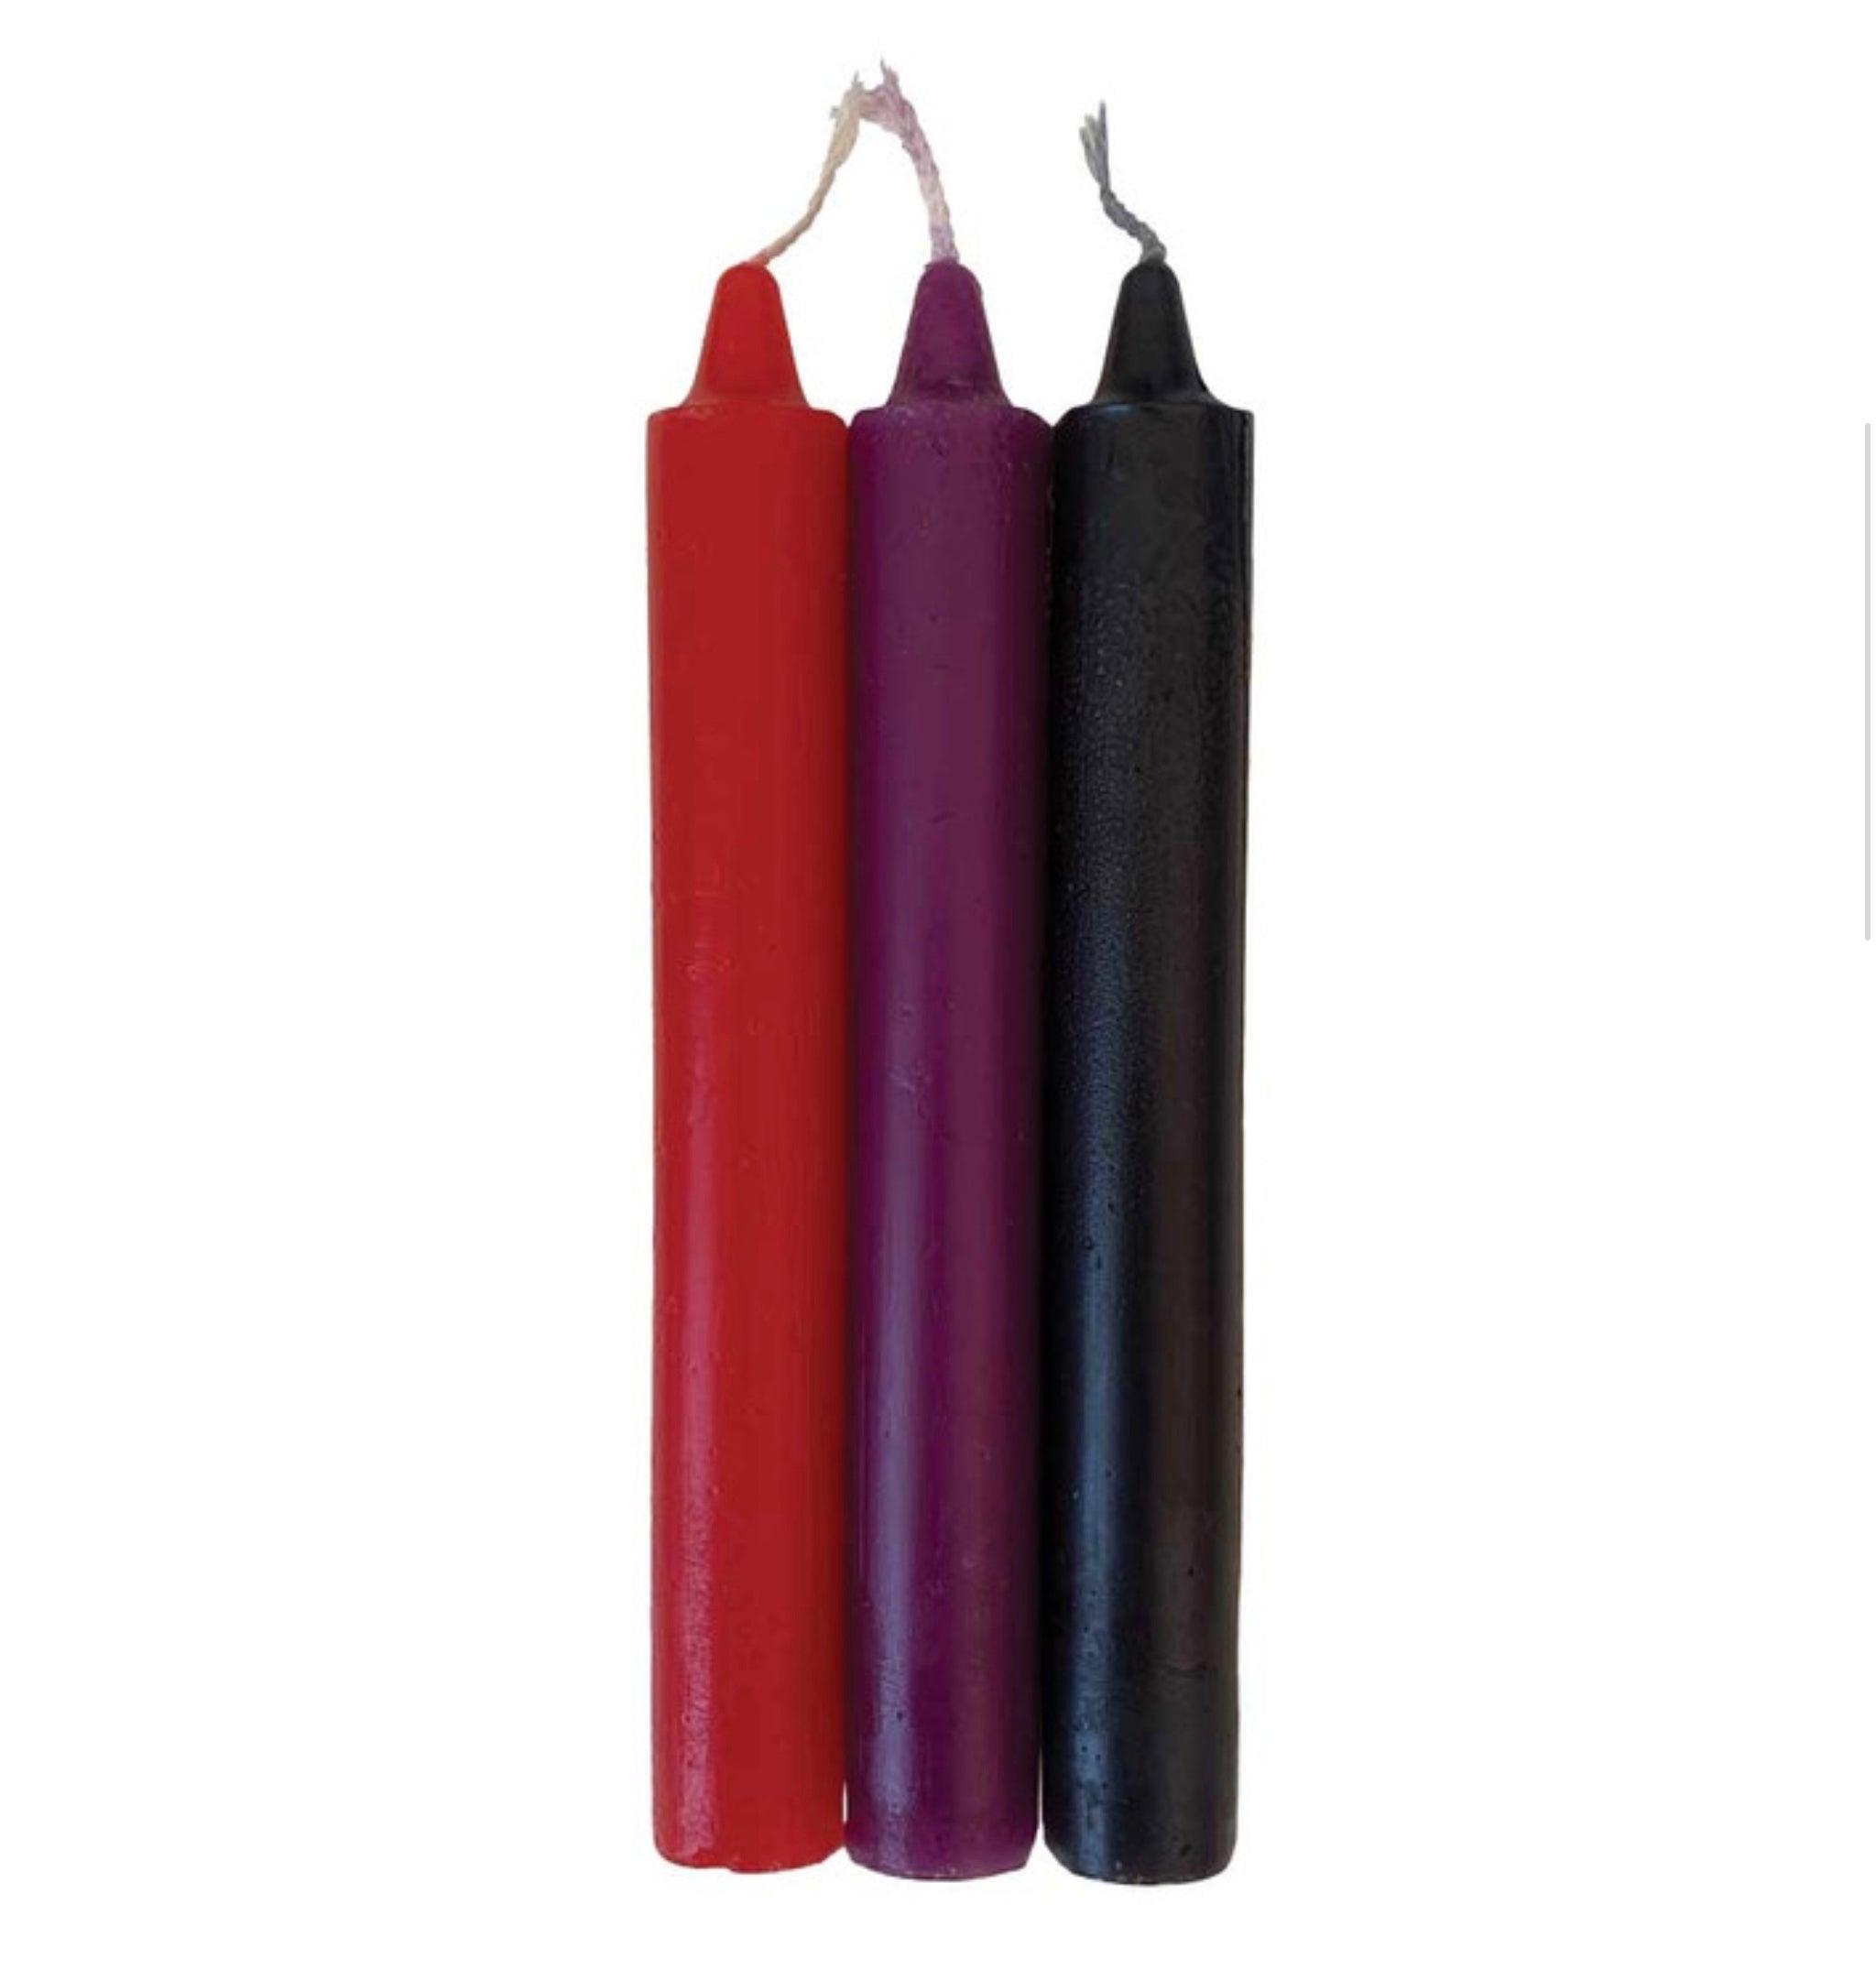 Velvetine Teasing Wax Candles: 3Pack - Passionfruit